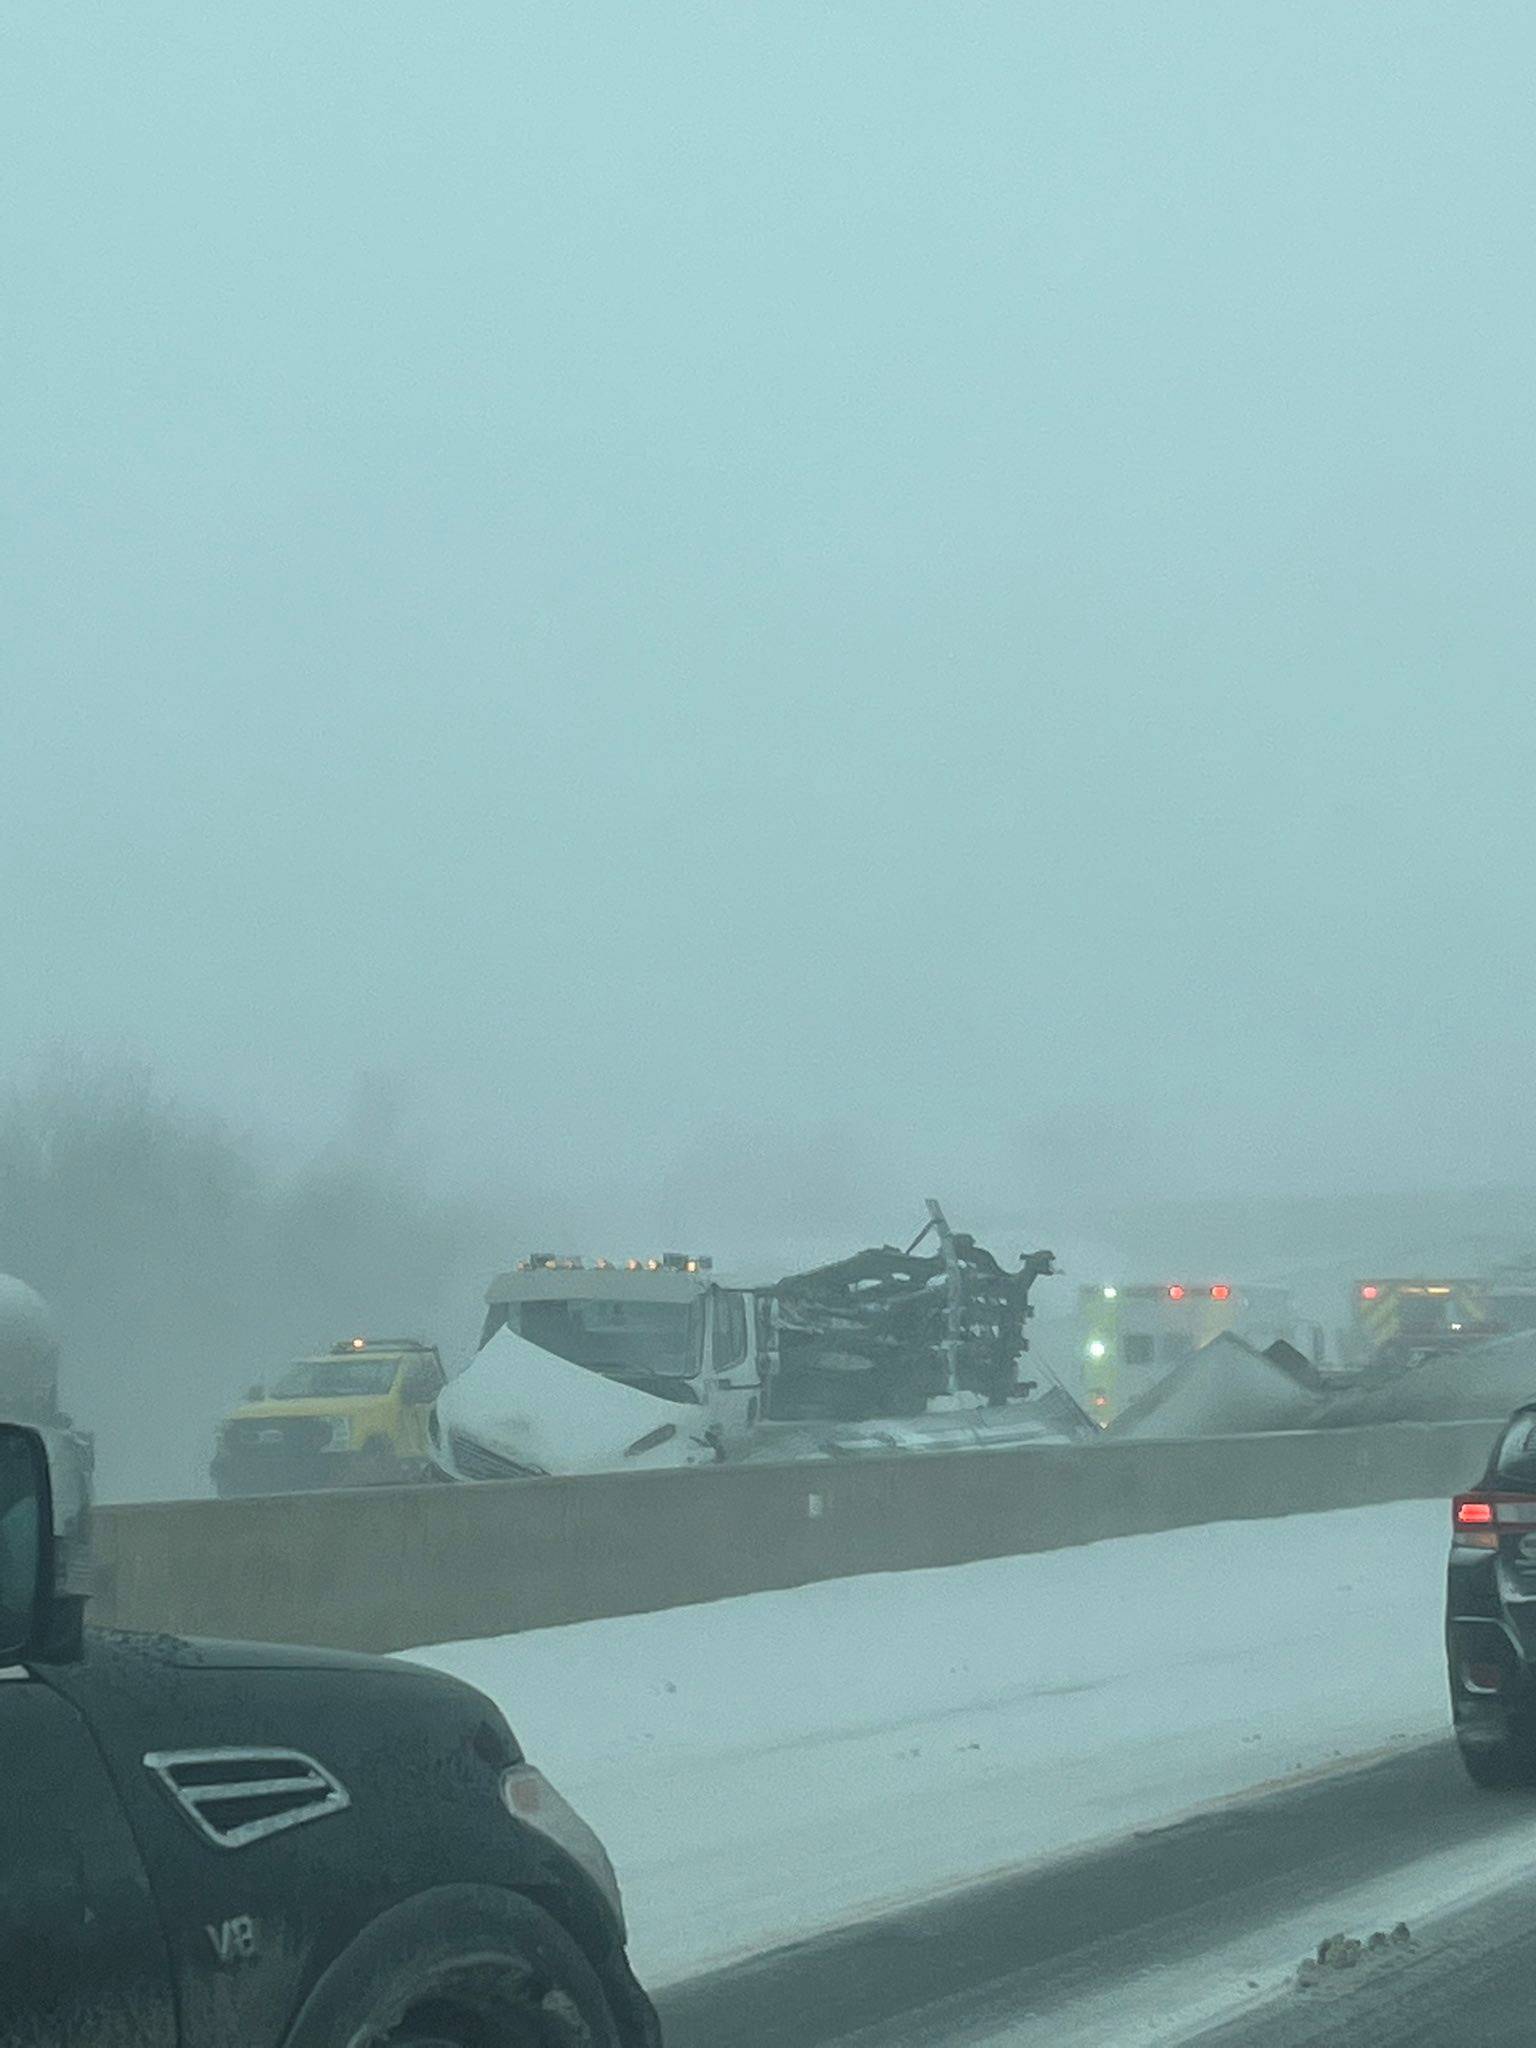 Ohio Turnpike is seen closed in both directions after a massive pileup blocked traffic near Sandusky amid a severe winter storm